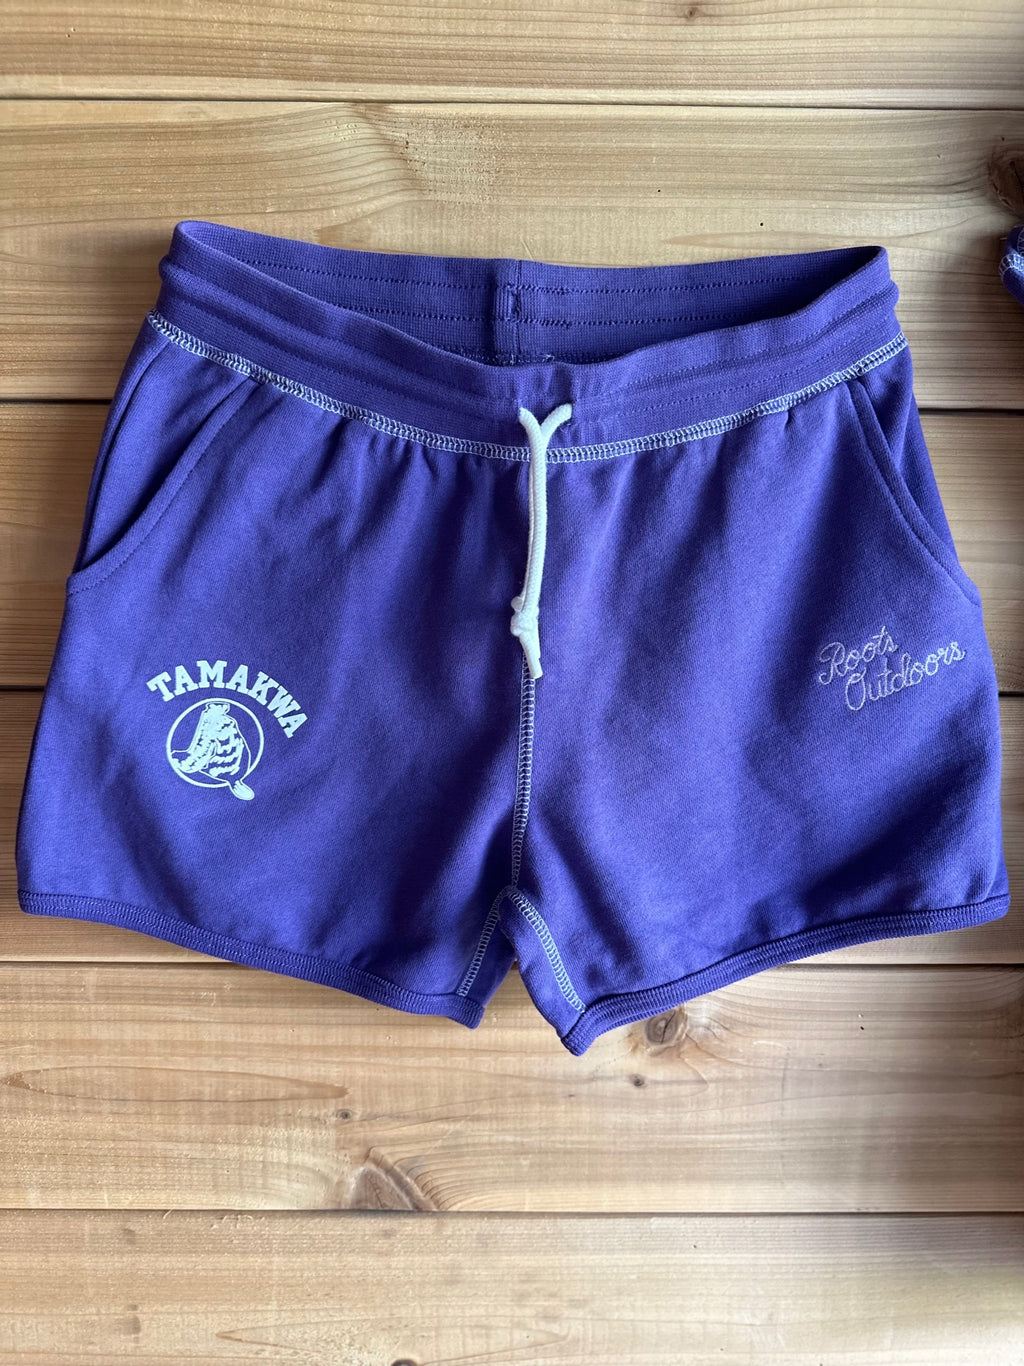 Youth Purple "Outdoors" Shorts